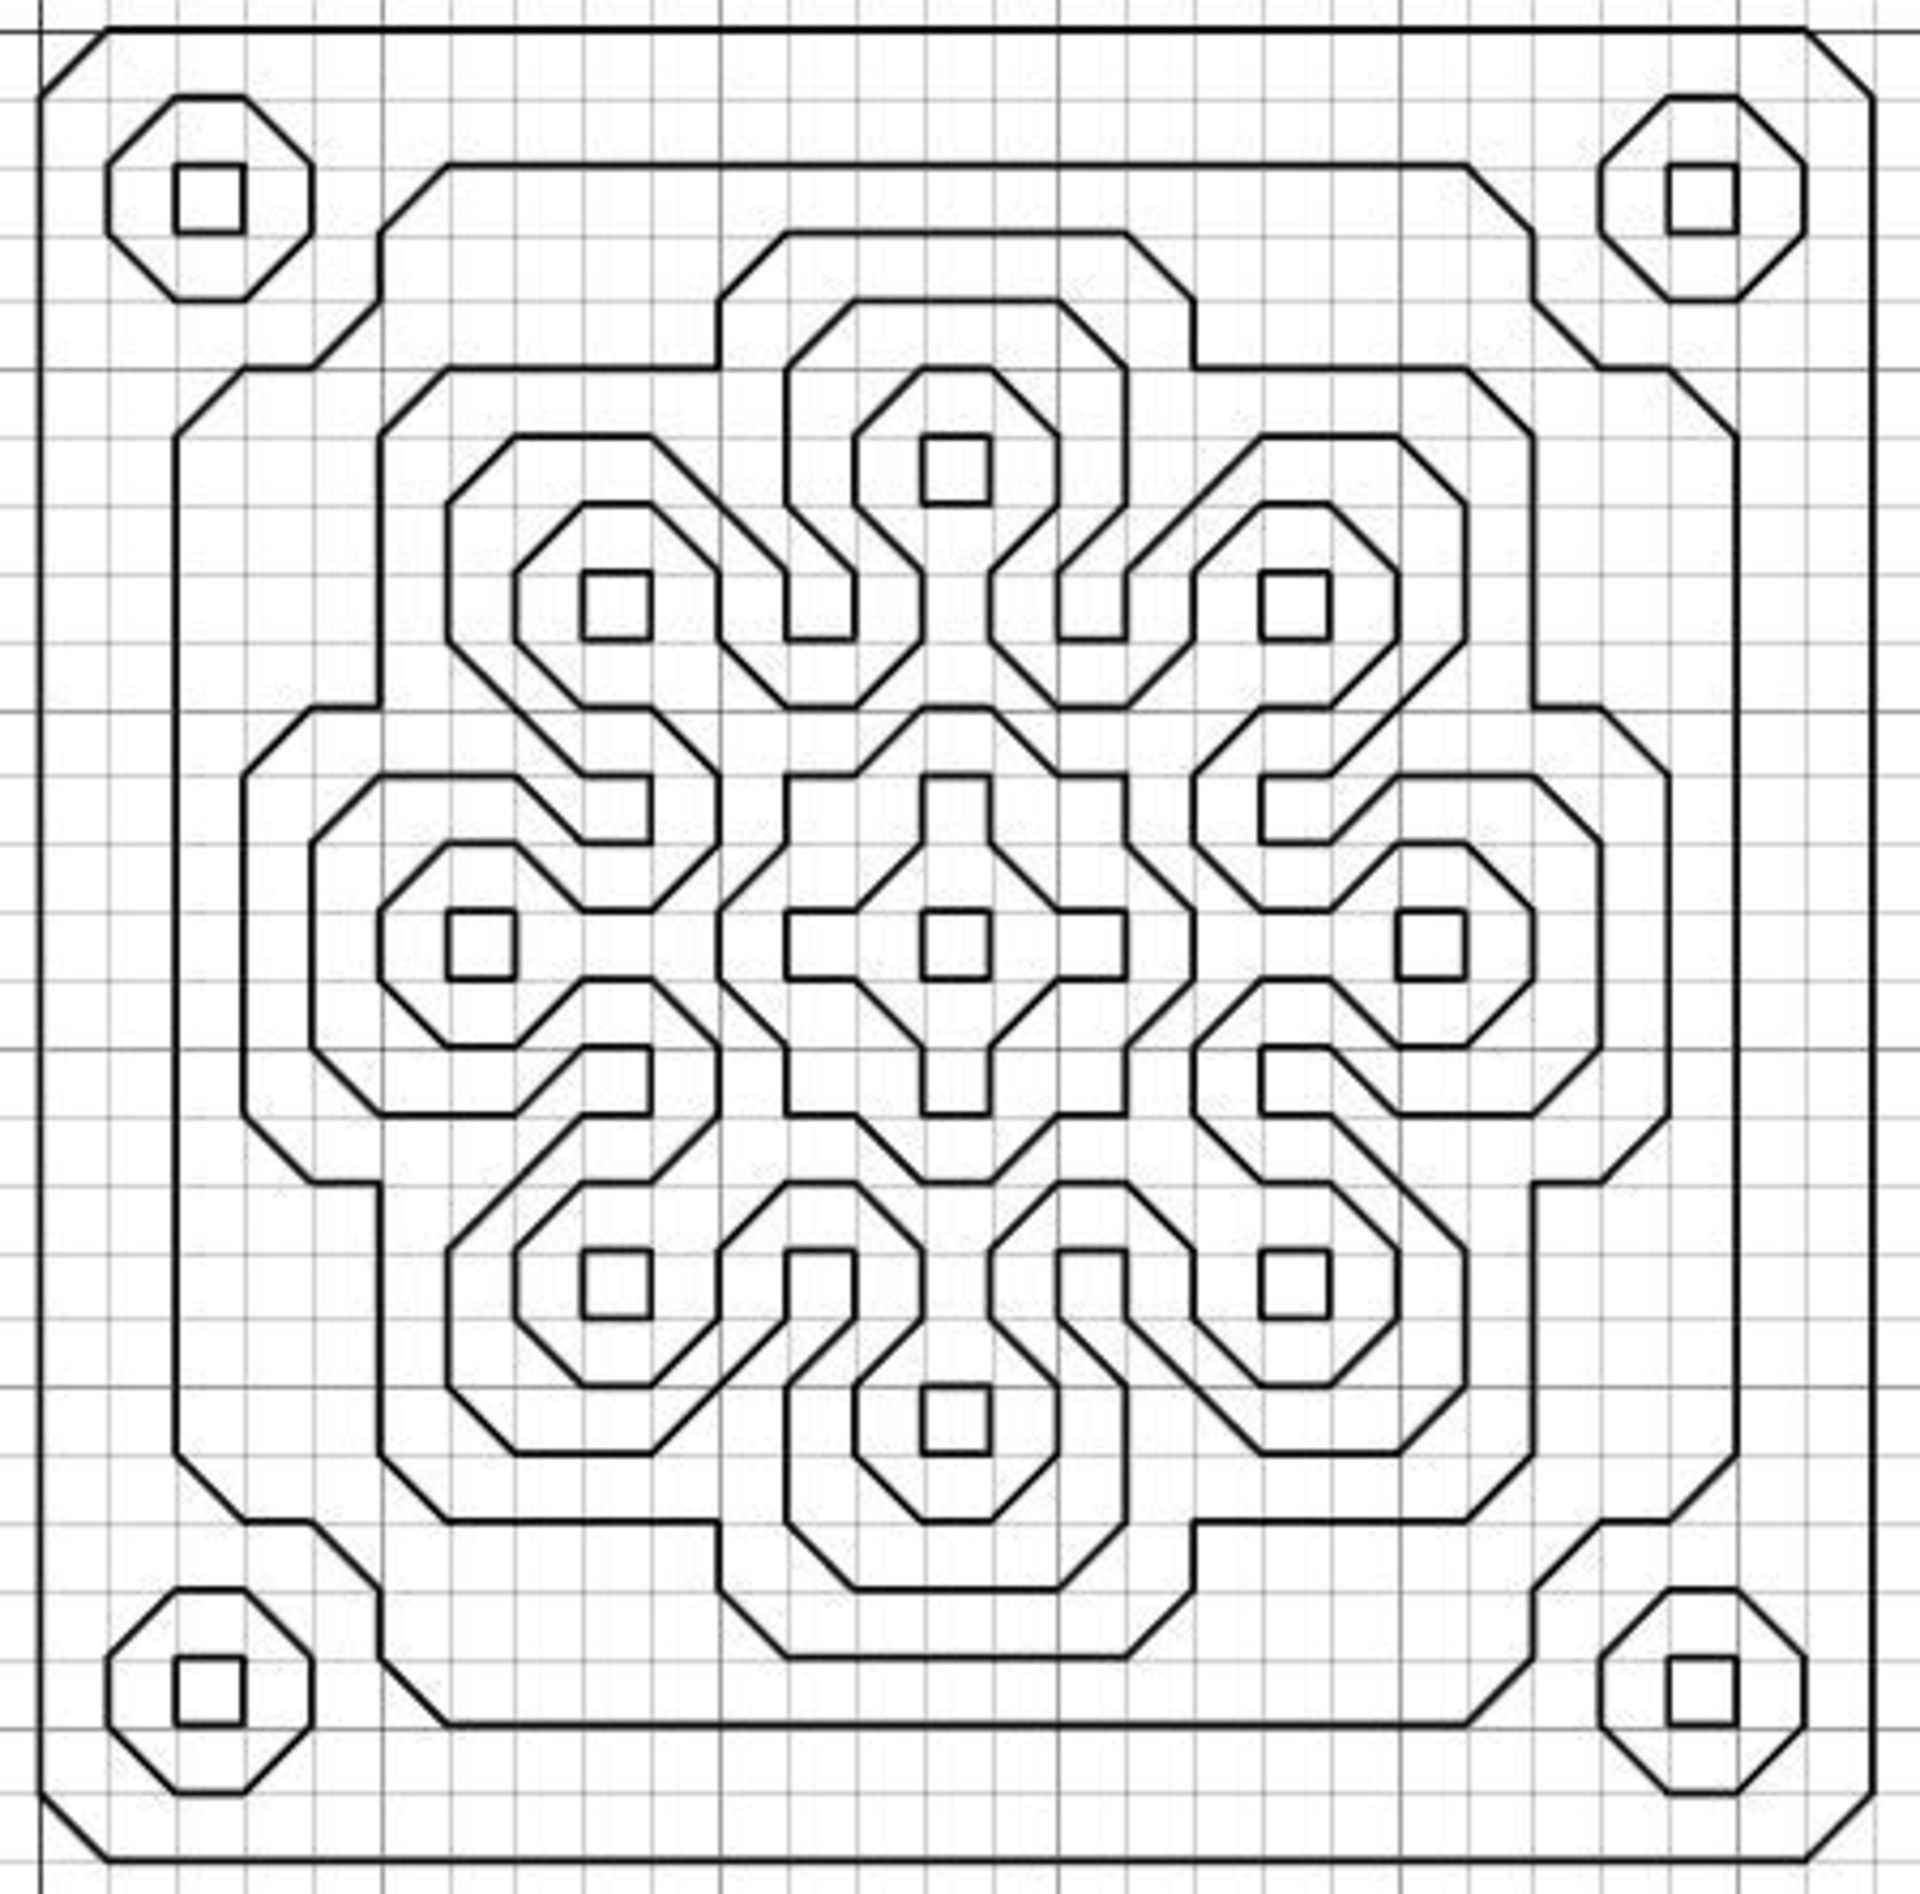 Blackwork Embroidery Patterns 81408161 Imaginesque Free Blackwork Embroidery Patterns Web Page